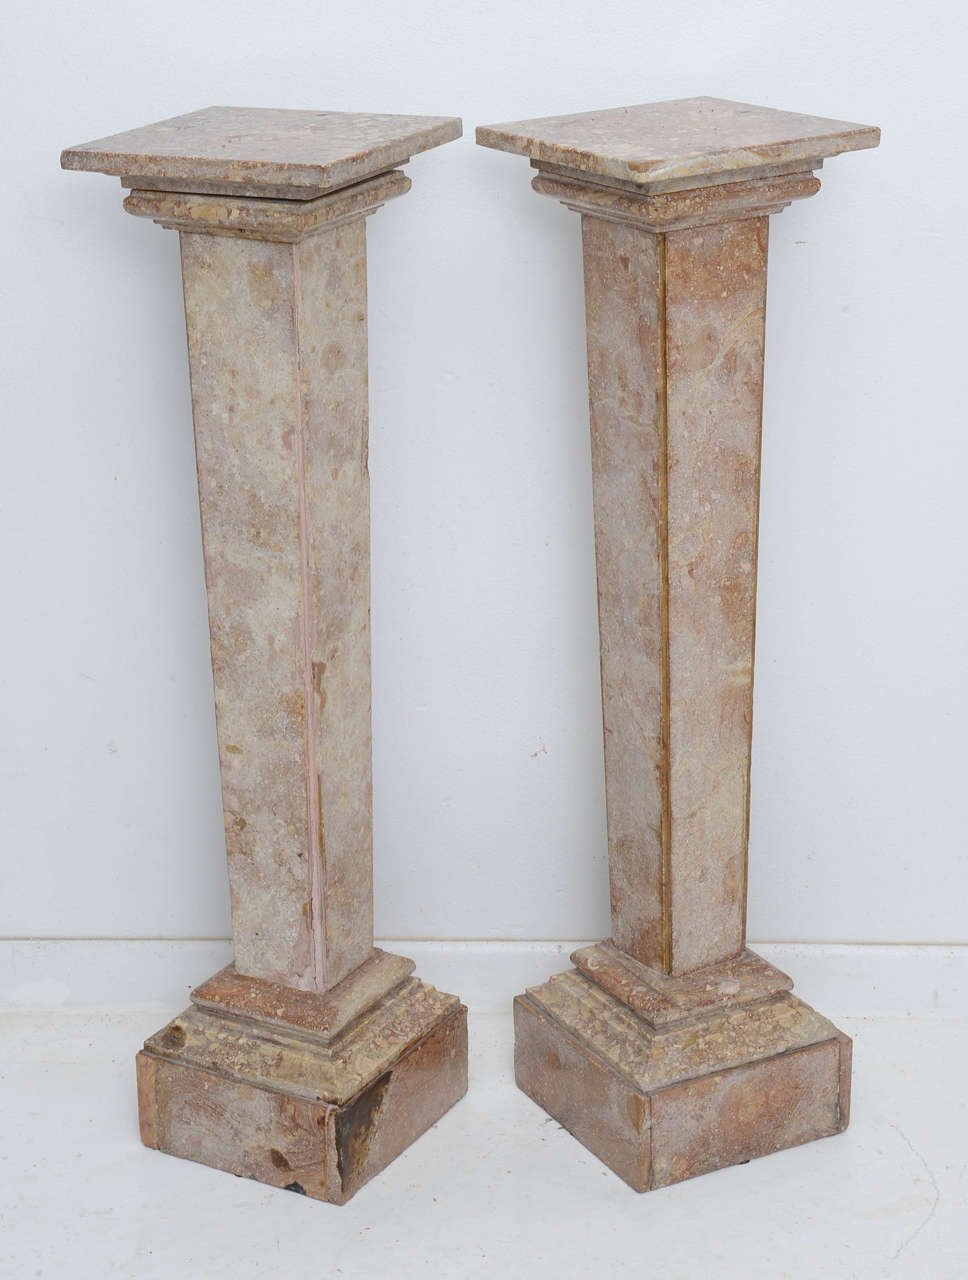 An unusual pair of late 18th century fossilized stone pedestals.

Please feel free to contact us directly for any additional information or a shipping quote by clicking 